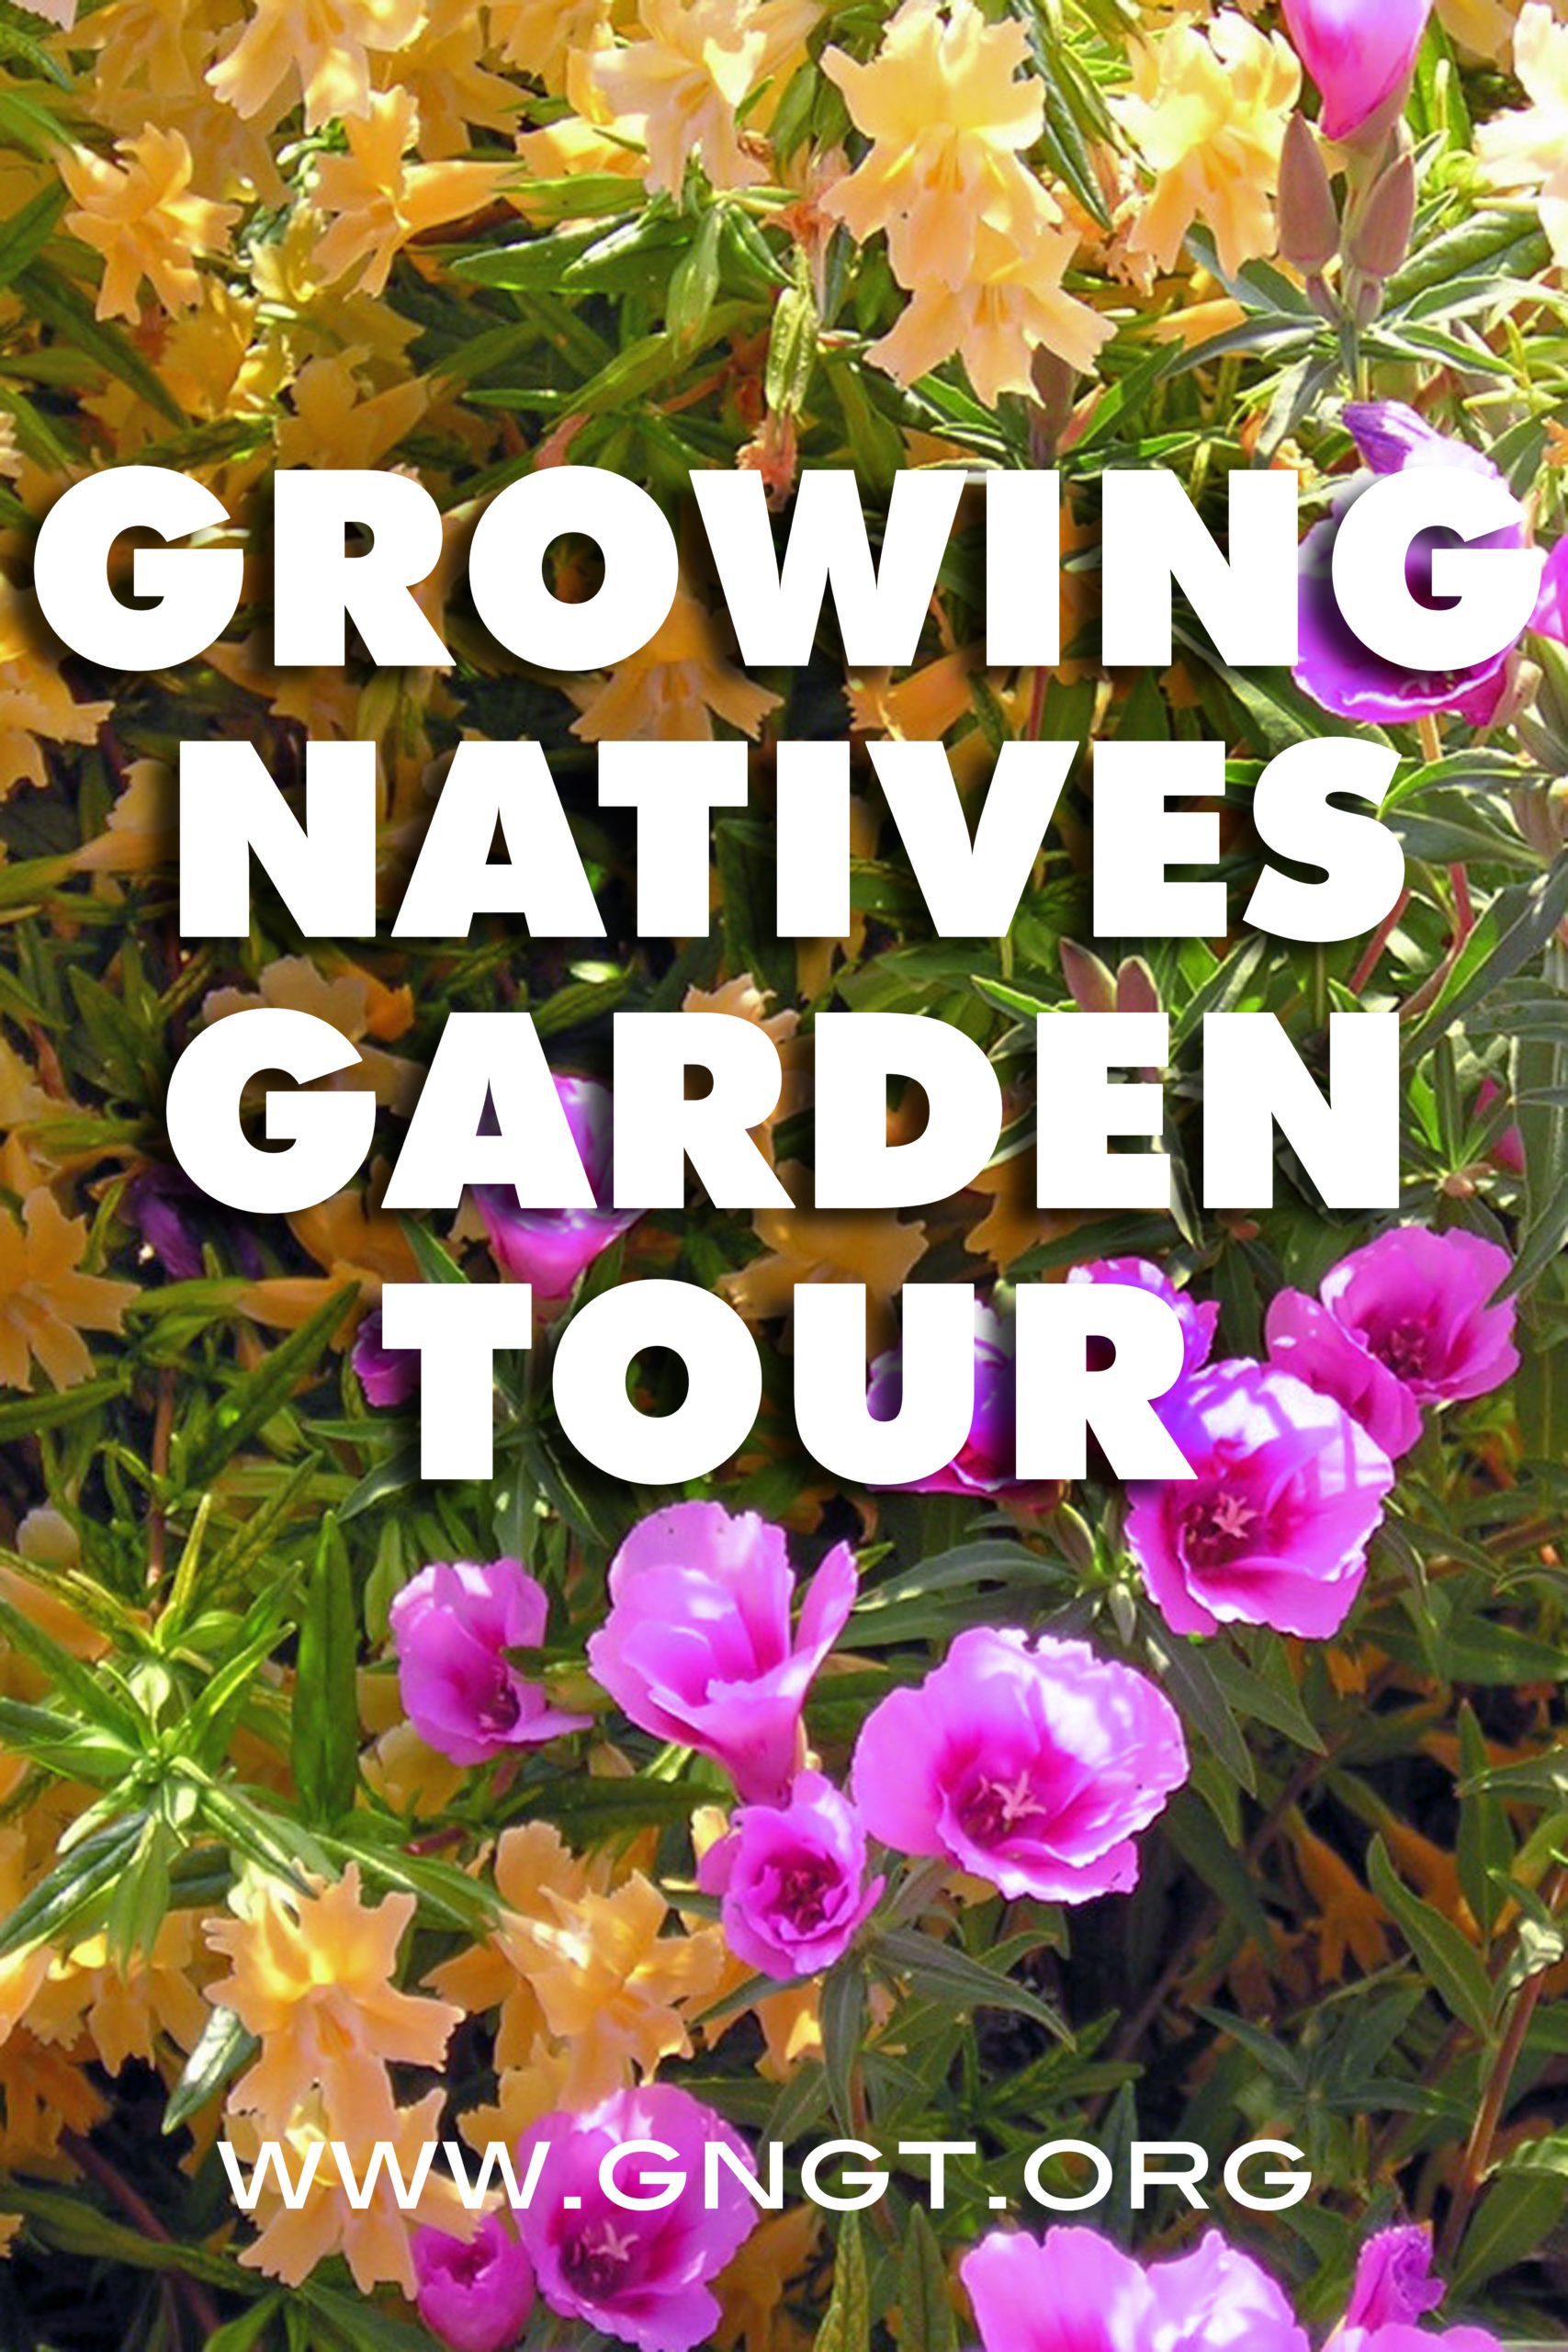 Other tours « Bringing Back the Natives Garden Tour